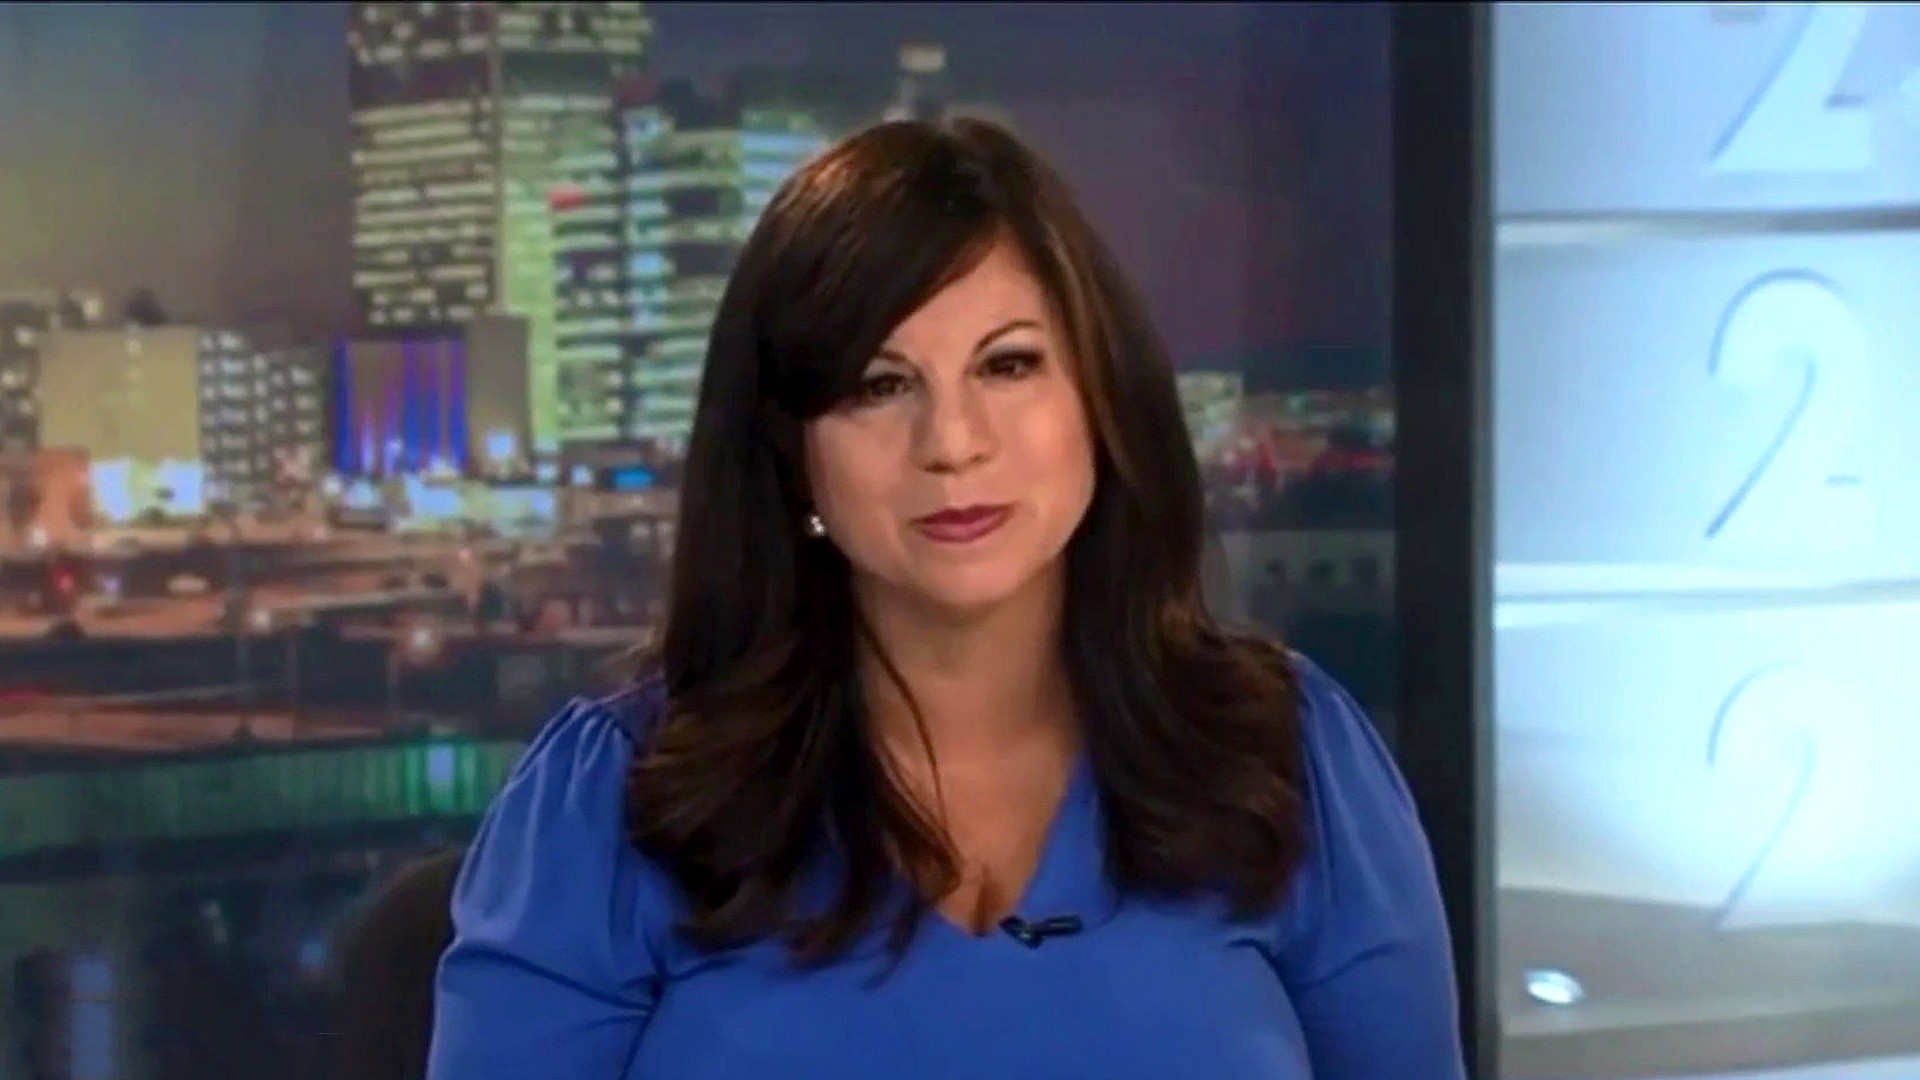 Oklahoma news anchor suffers 'beginnings of a stroke' on live TV